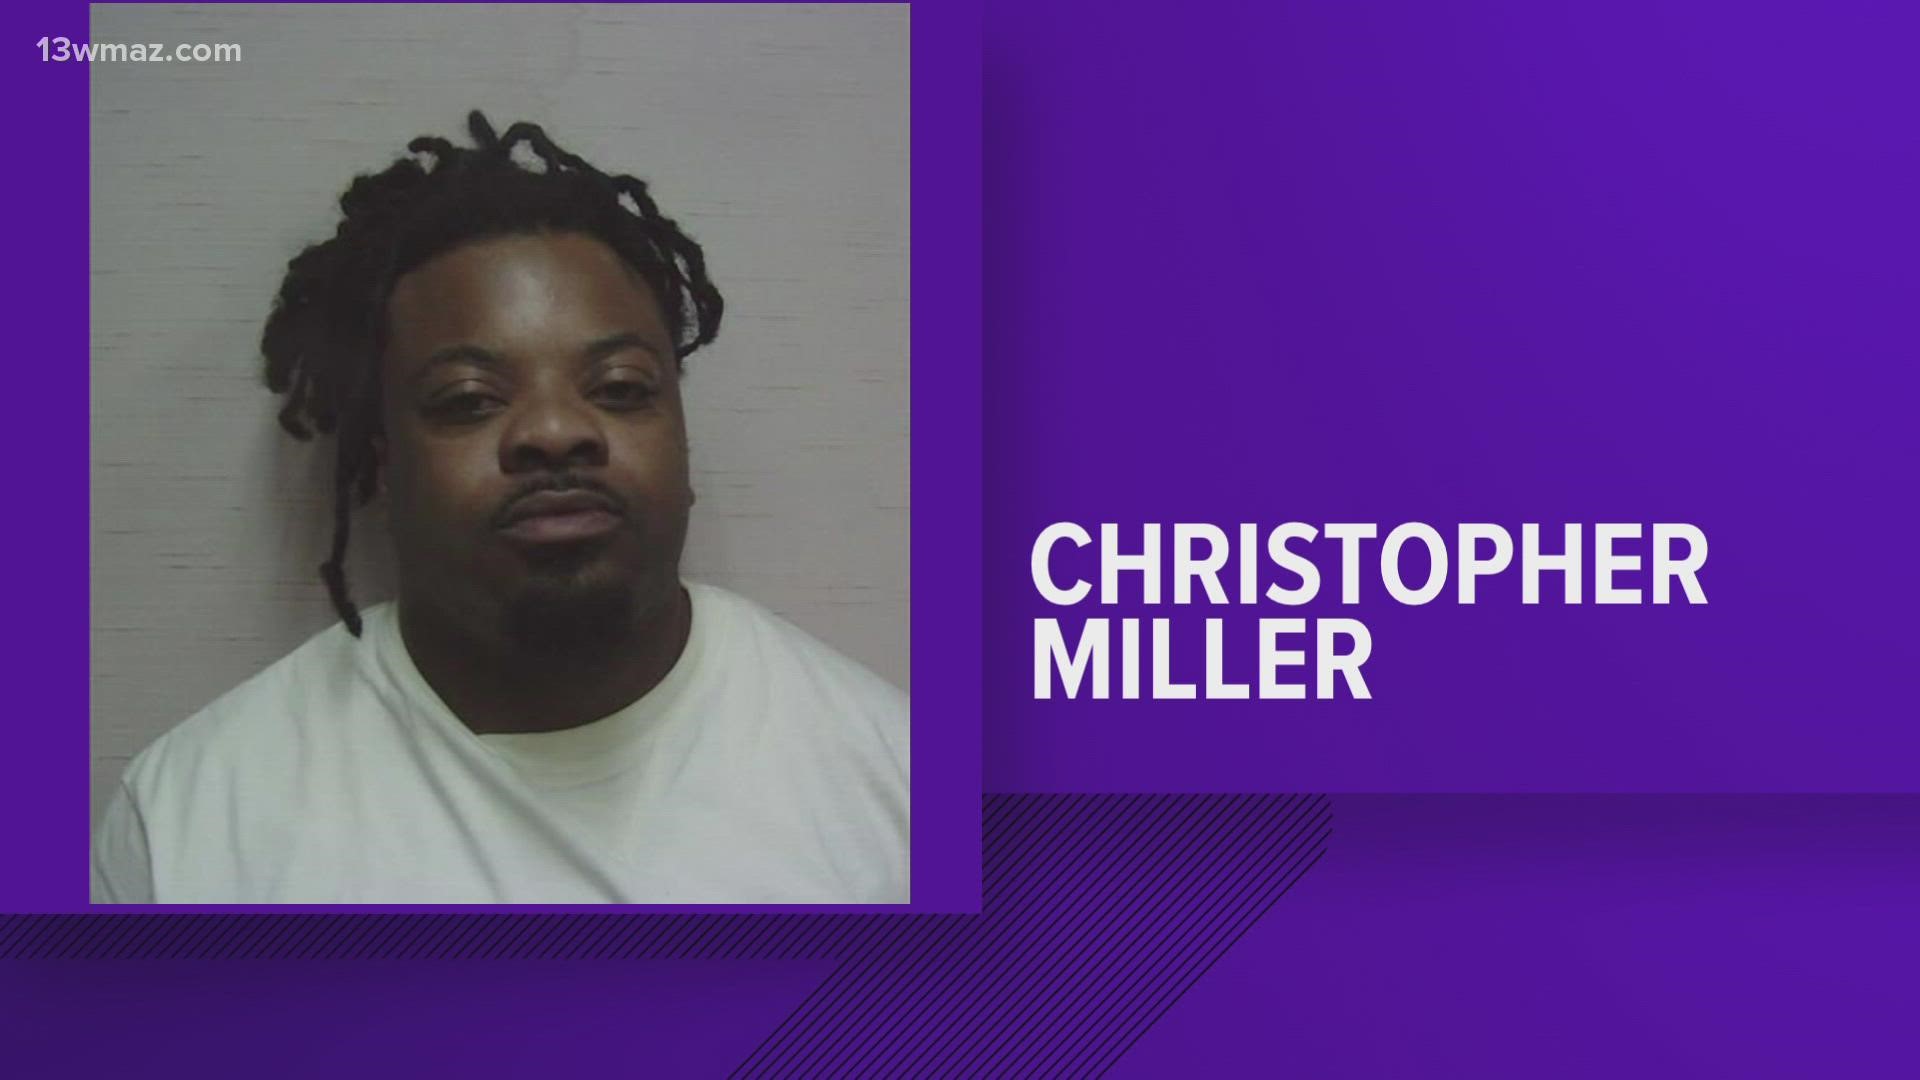 Christopher Miller is wanted on charges of murder, aggravated assault, among others.